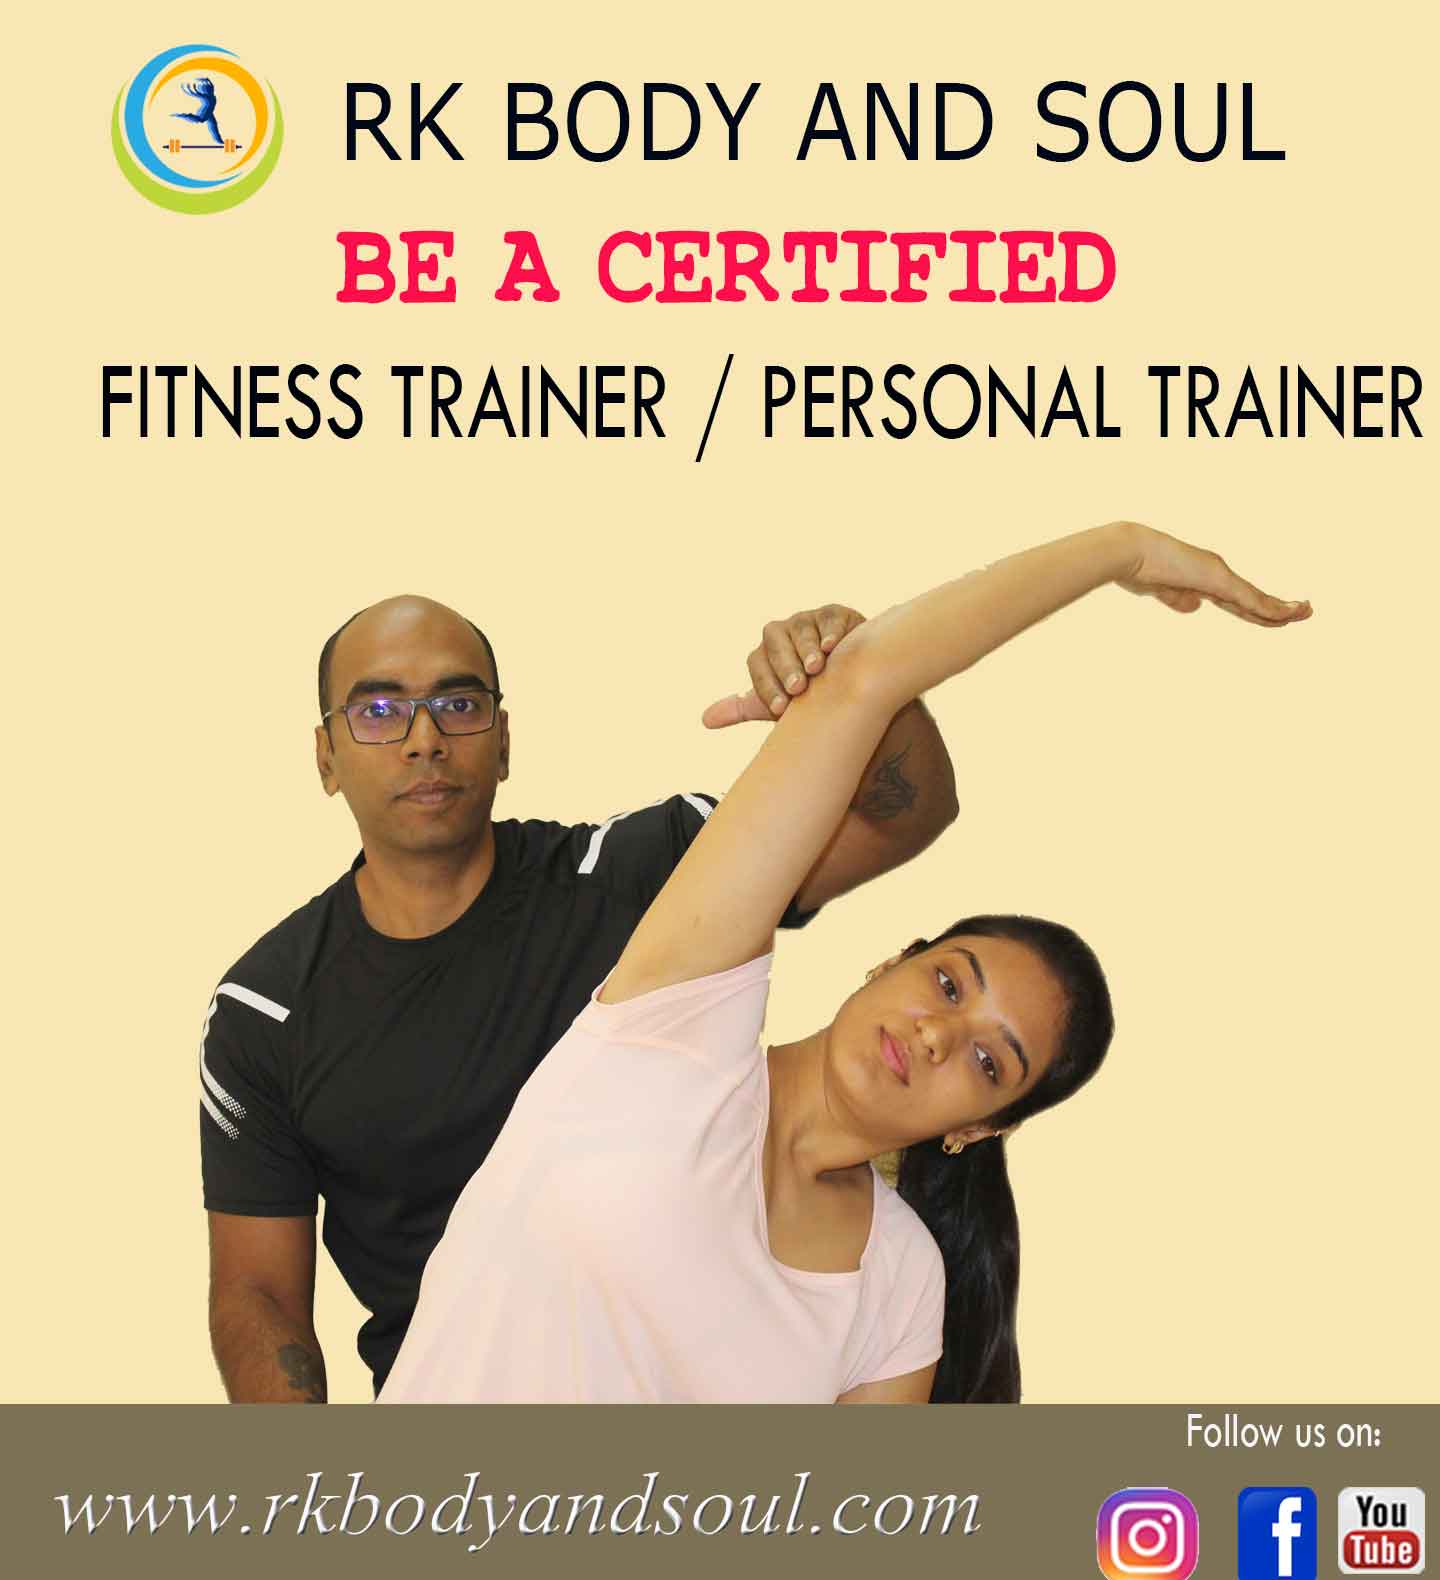 FITNESS TRAINER CERTIFICATION